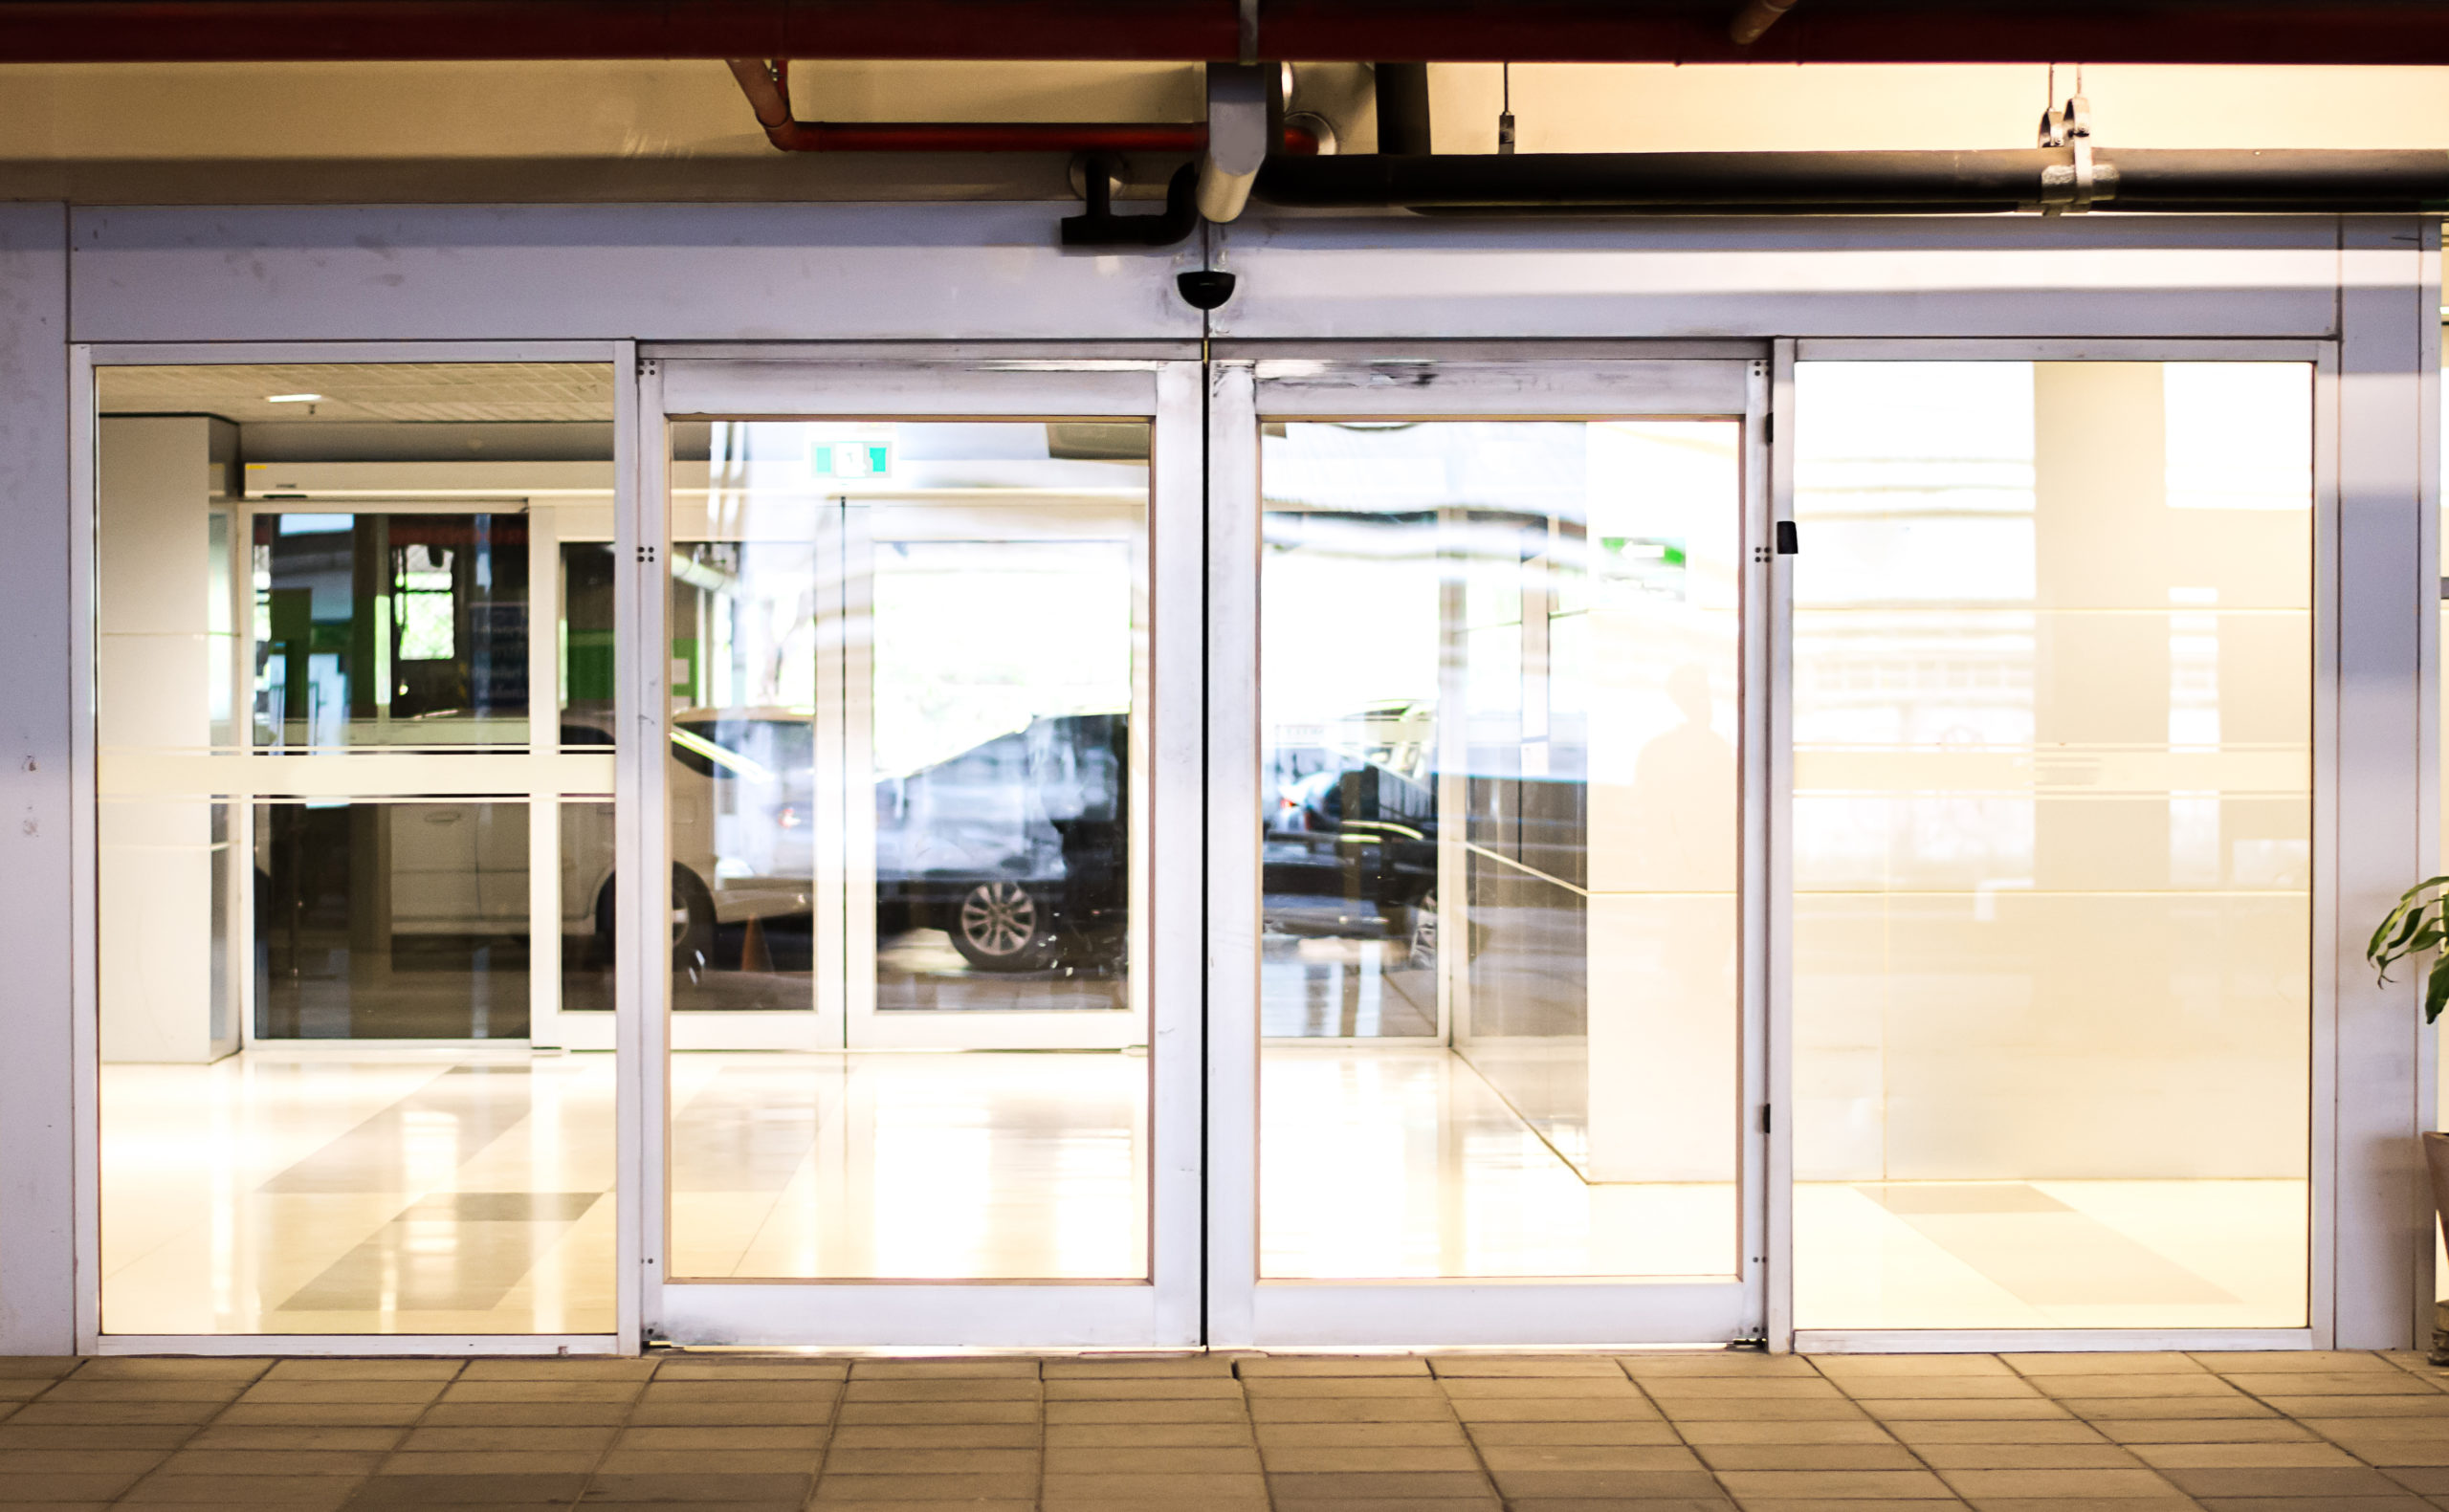 Blank,Sliding,Glass,Doors,Entrance,At,Airport.glass,Doors,In,An